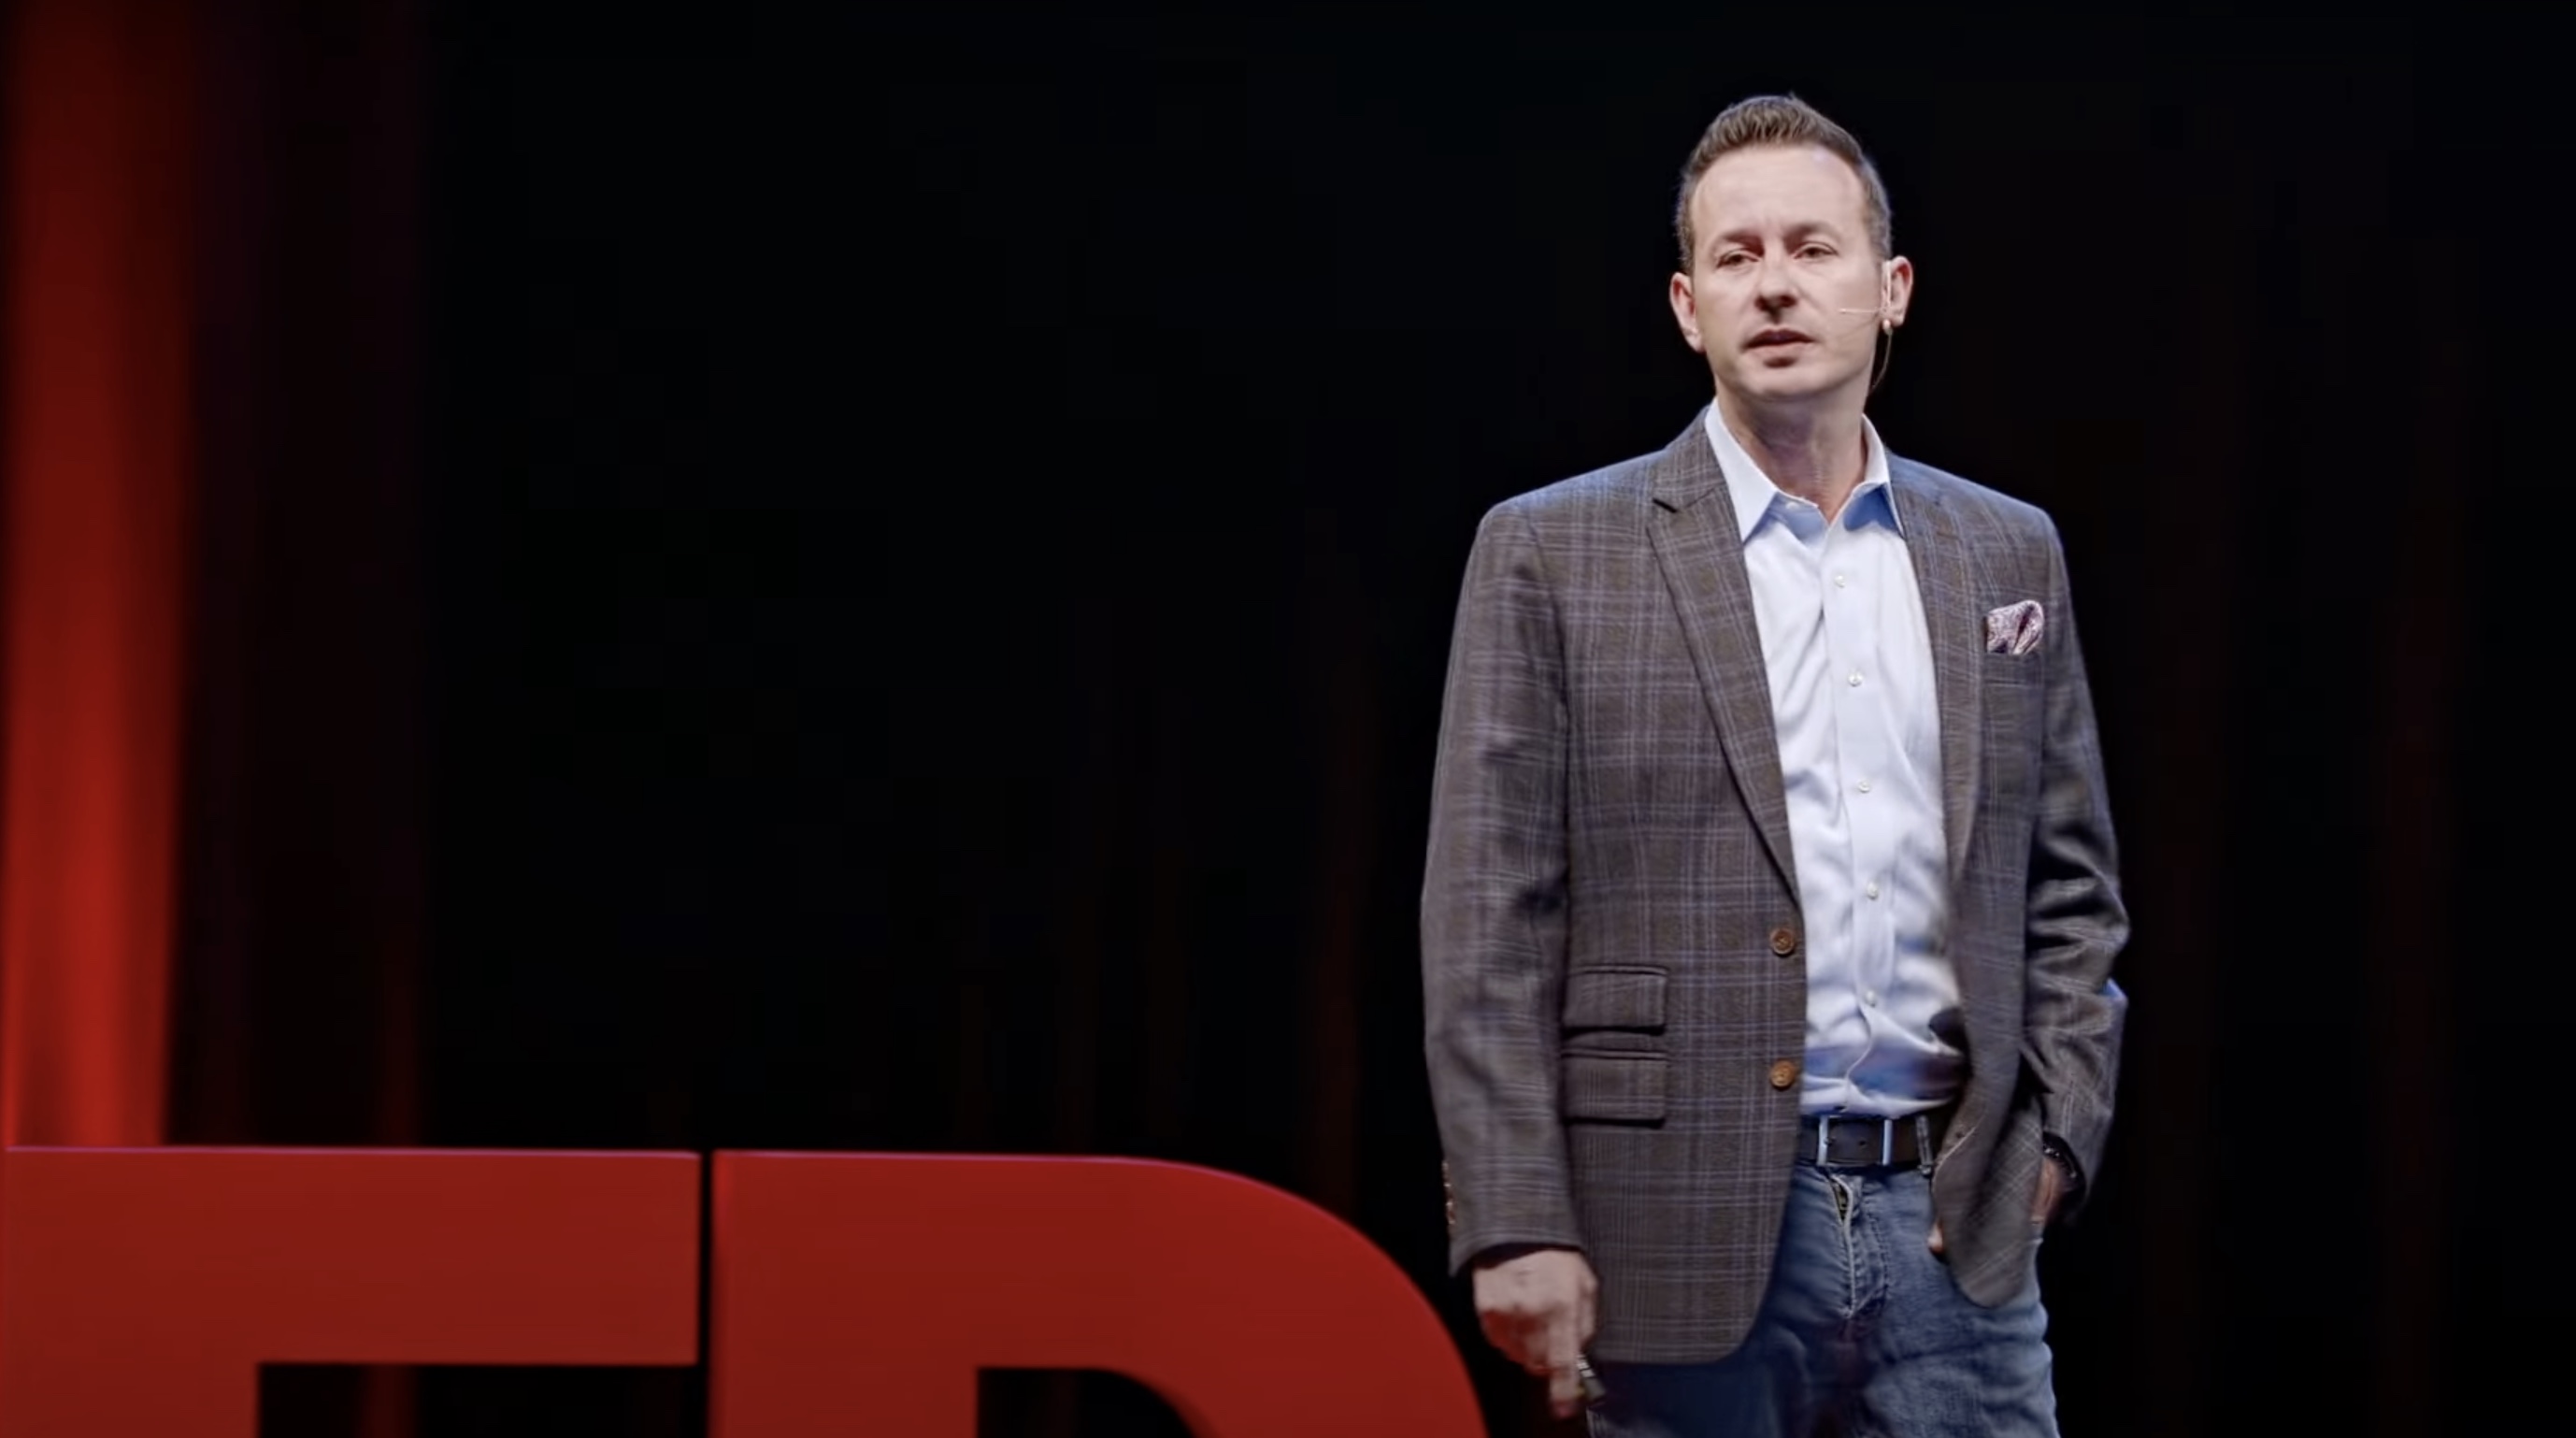 Nick Padlo, Local Business Leader and Mental Health Advocate, Shares Visionary Ideas on Addiction Recovery in TED Talk